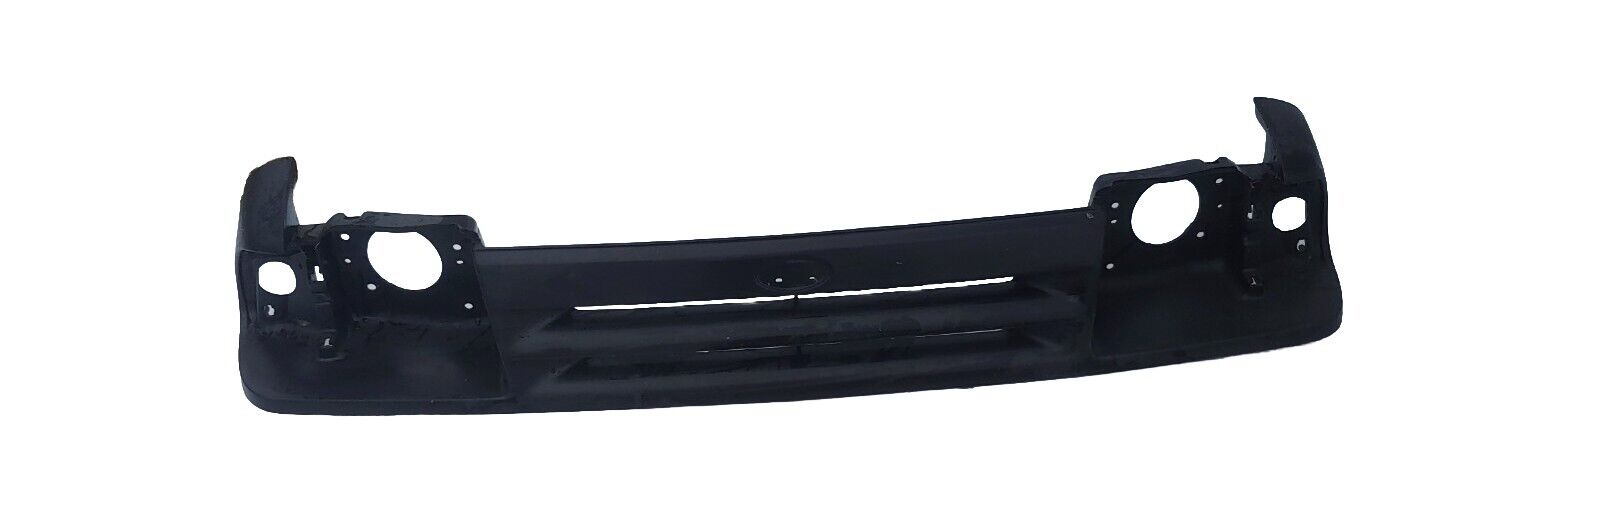 NEW 1984-1985 Ford Tempo  front header panel #E43B-8242-A  Hard To Find 